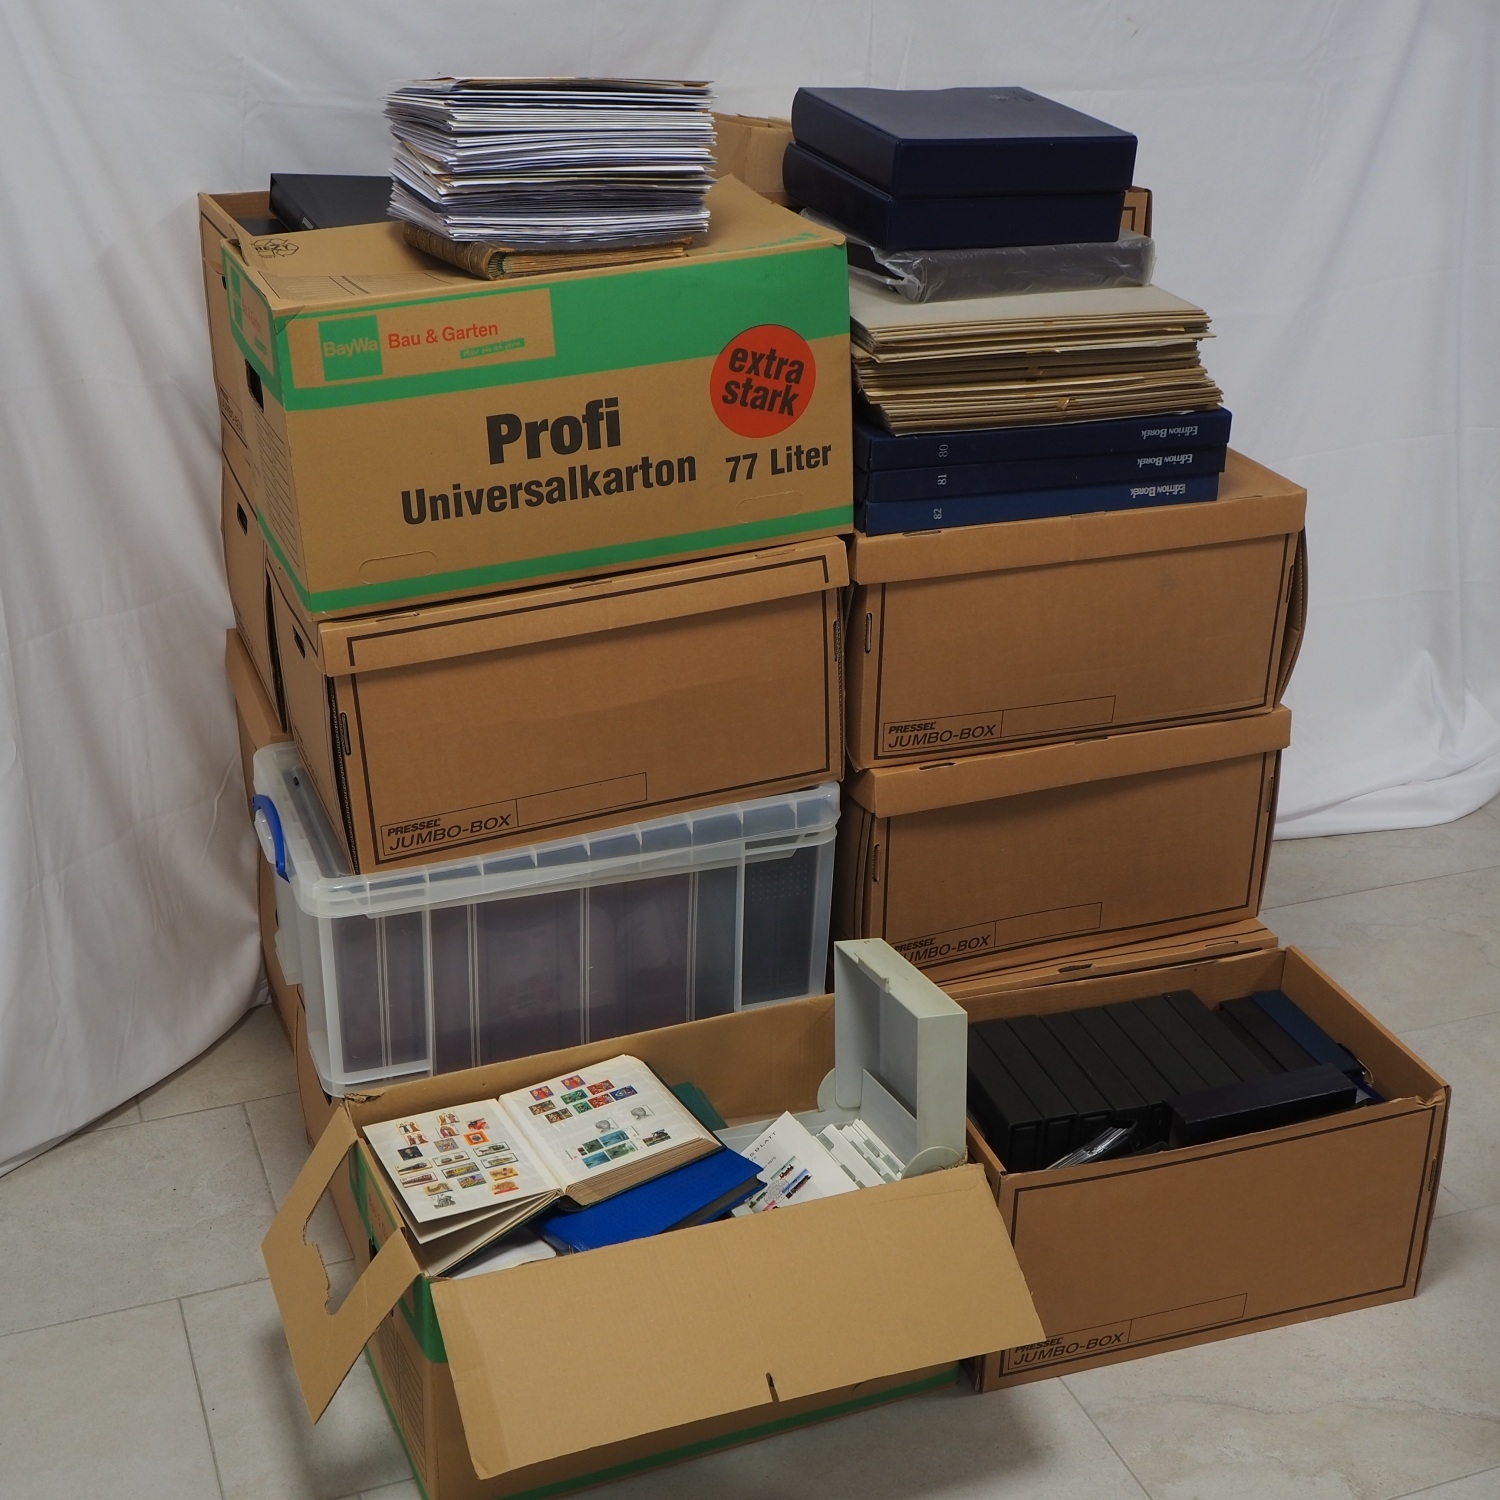 Huge assortment of stamps, plus numismatic sheets with commemorative coins, 18 full moving boxes